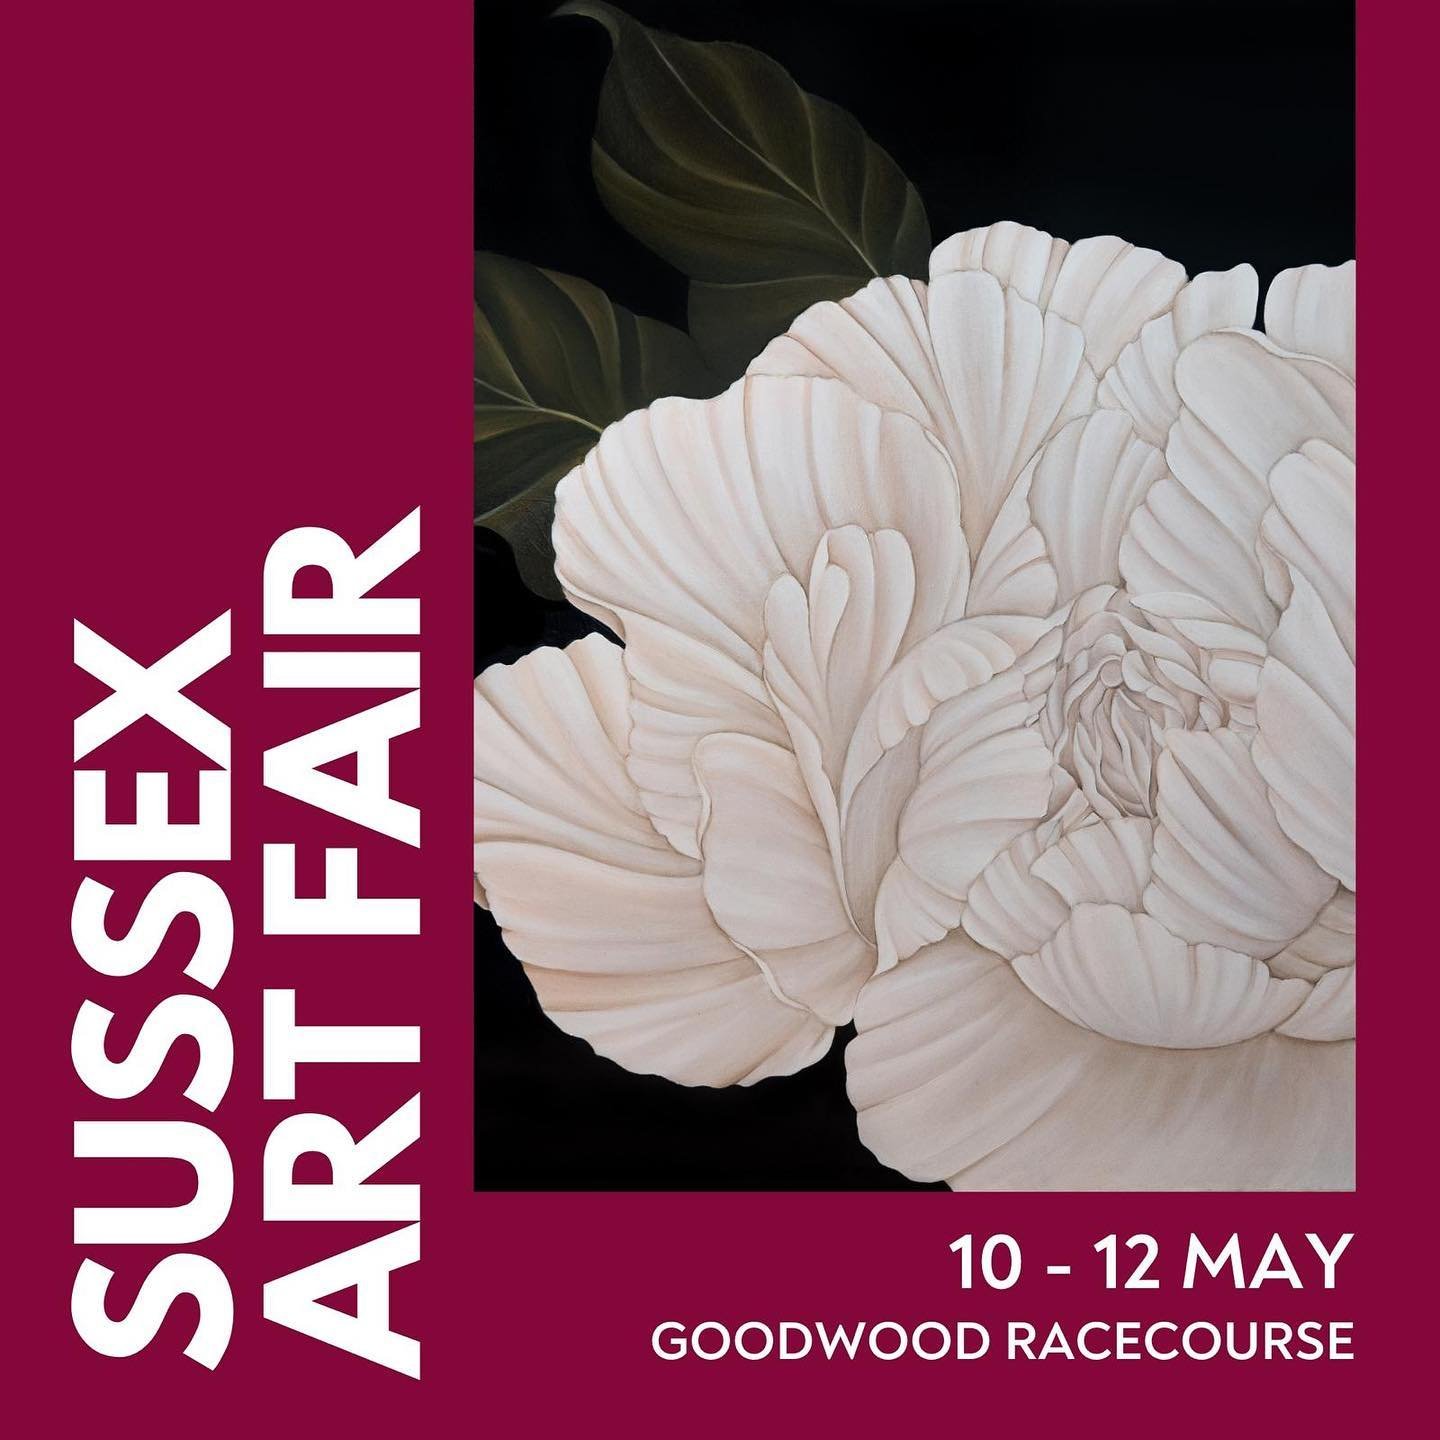 Looking forward to bringing a collection of works to the @sussexartfair this weekend at Goodwood Racecourse, including my piece White Peony. 
Find me there from Friday-Sunday!

#art #artist #sussexartfair #westsussex #queerart #climatecrisis #florala